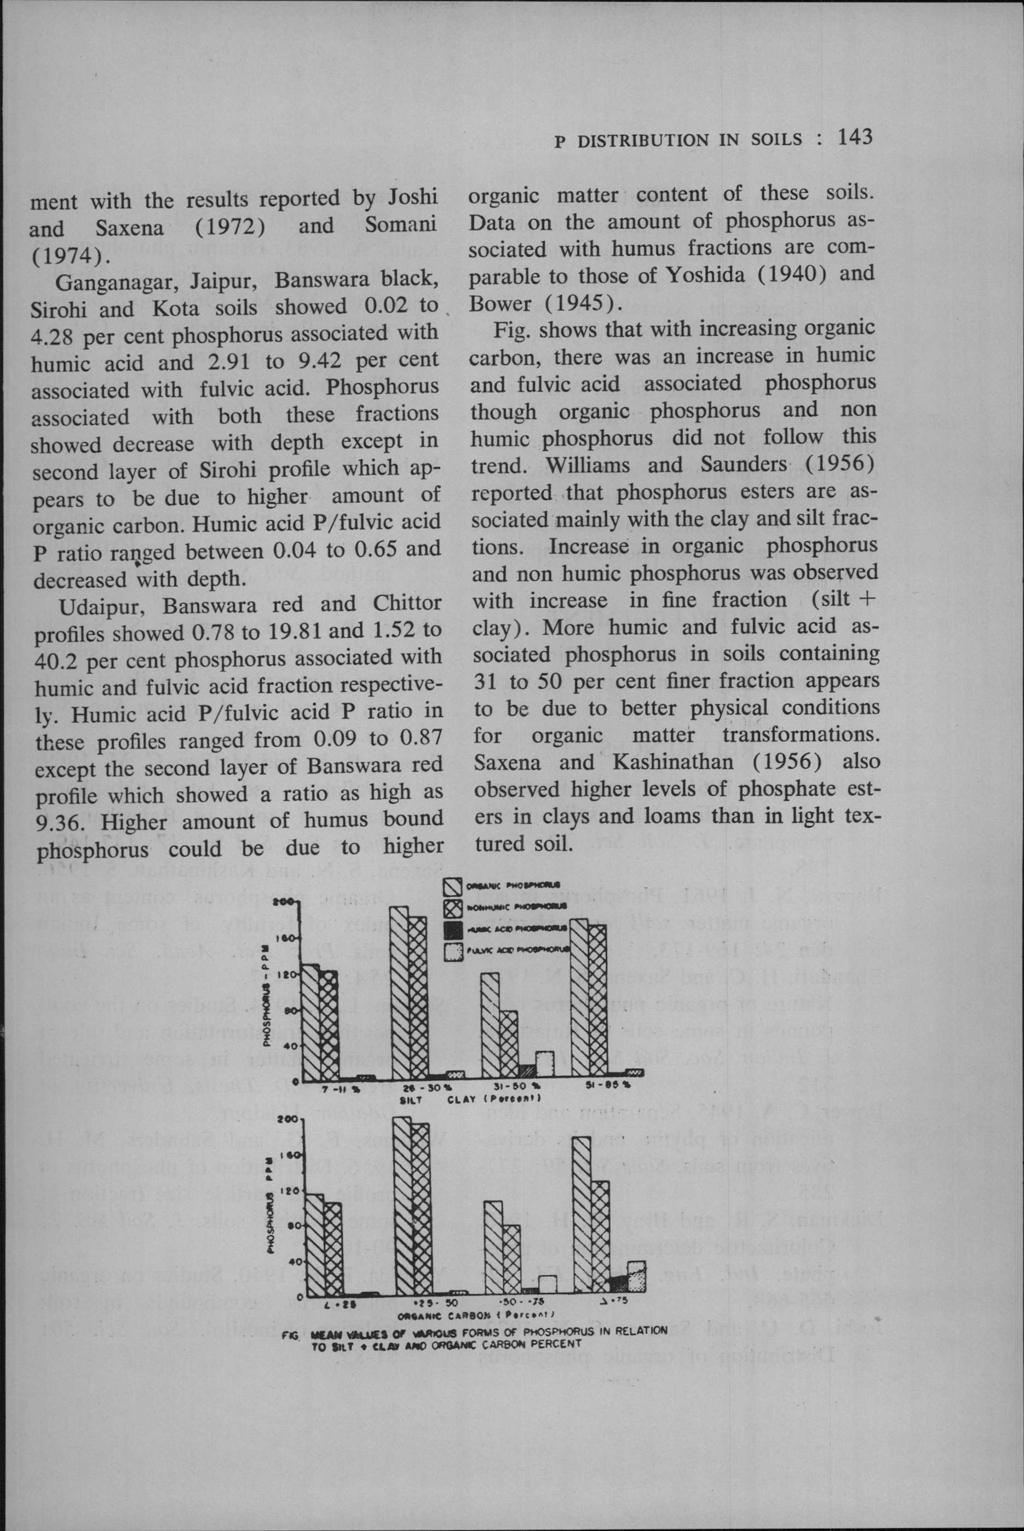 P DISTRIBUTION IN SOILS : 143 ment with the results reprted by Jshi and Saxena (1972) and Smani (1974). Ganganagar, Jaipur, Banswara black, Sirhi and Kta sils shwed 0.02 t. 4.